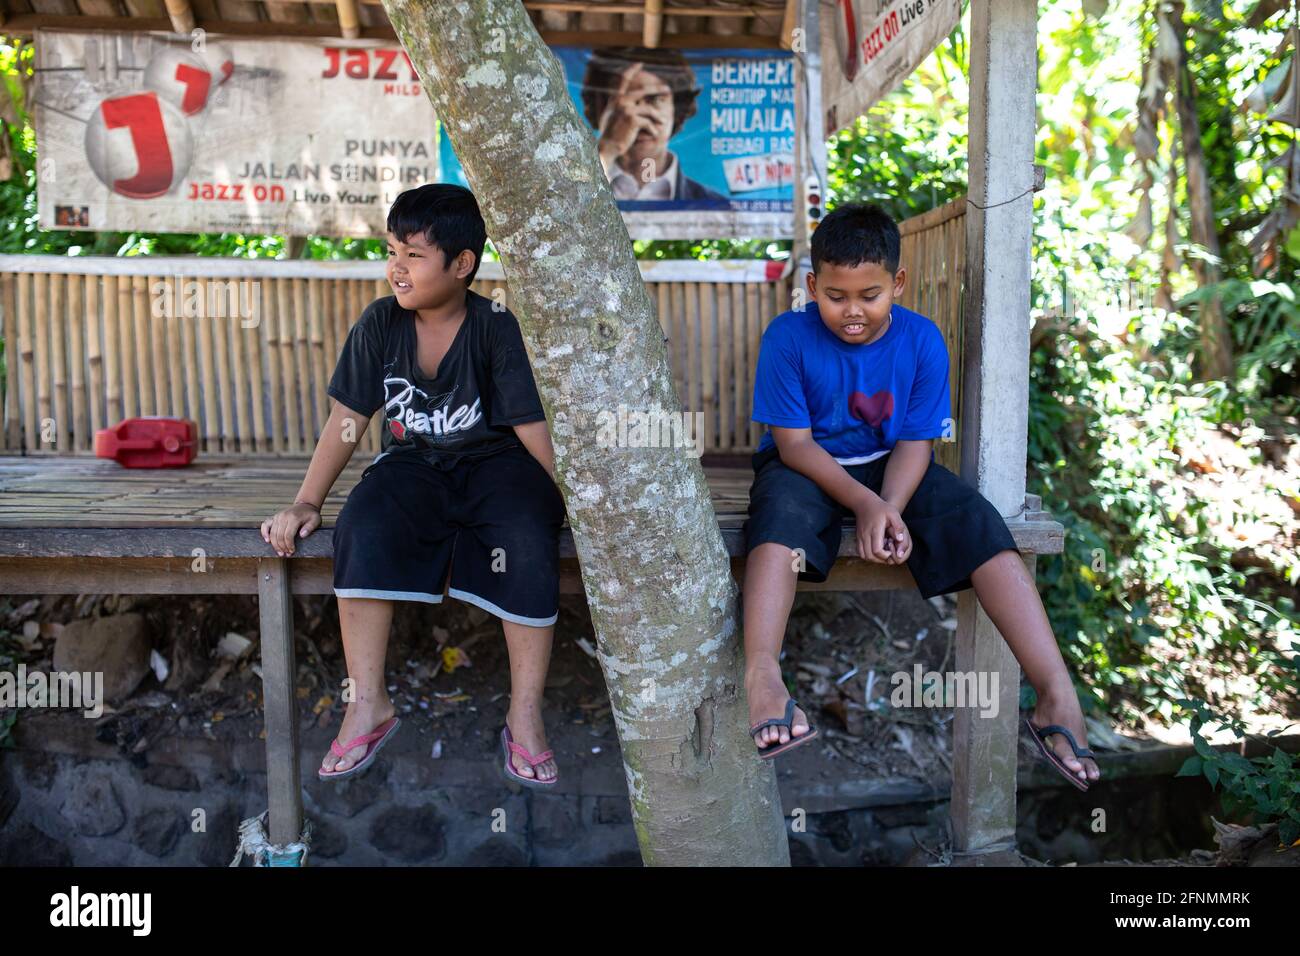 Bali, Indonesia - September 4, 2016: Children hanging out in the village. Stock Photo